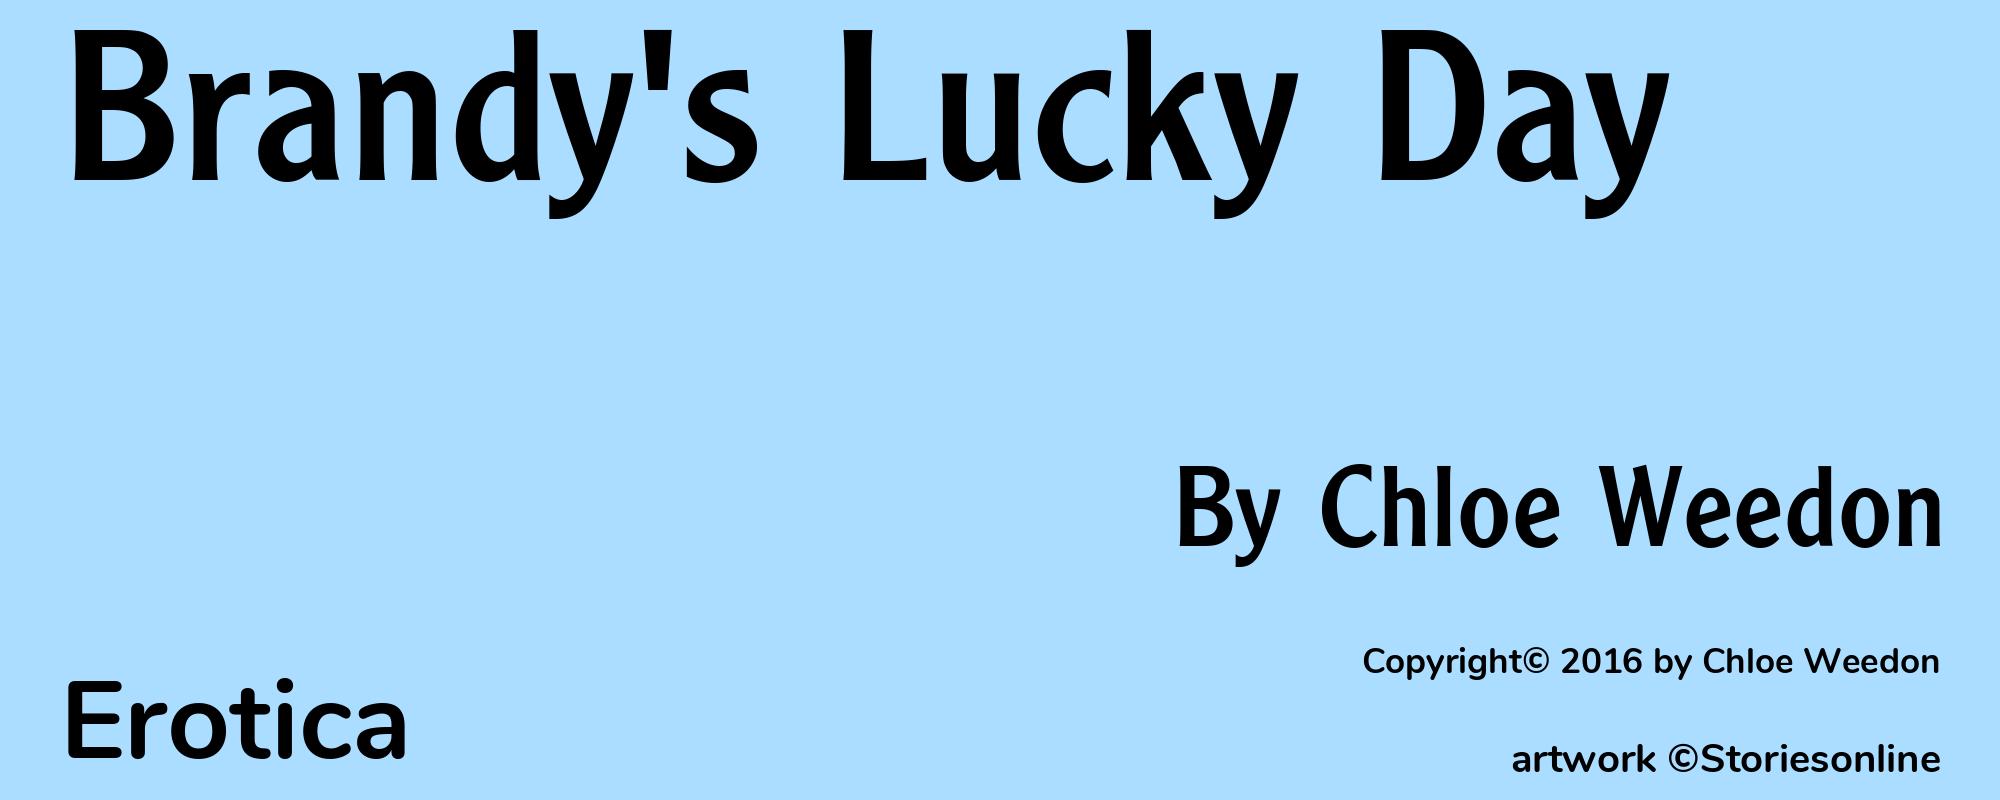 Brandy's Lucky Day - Cover